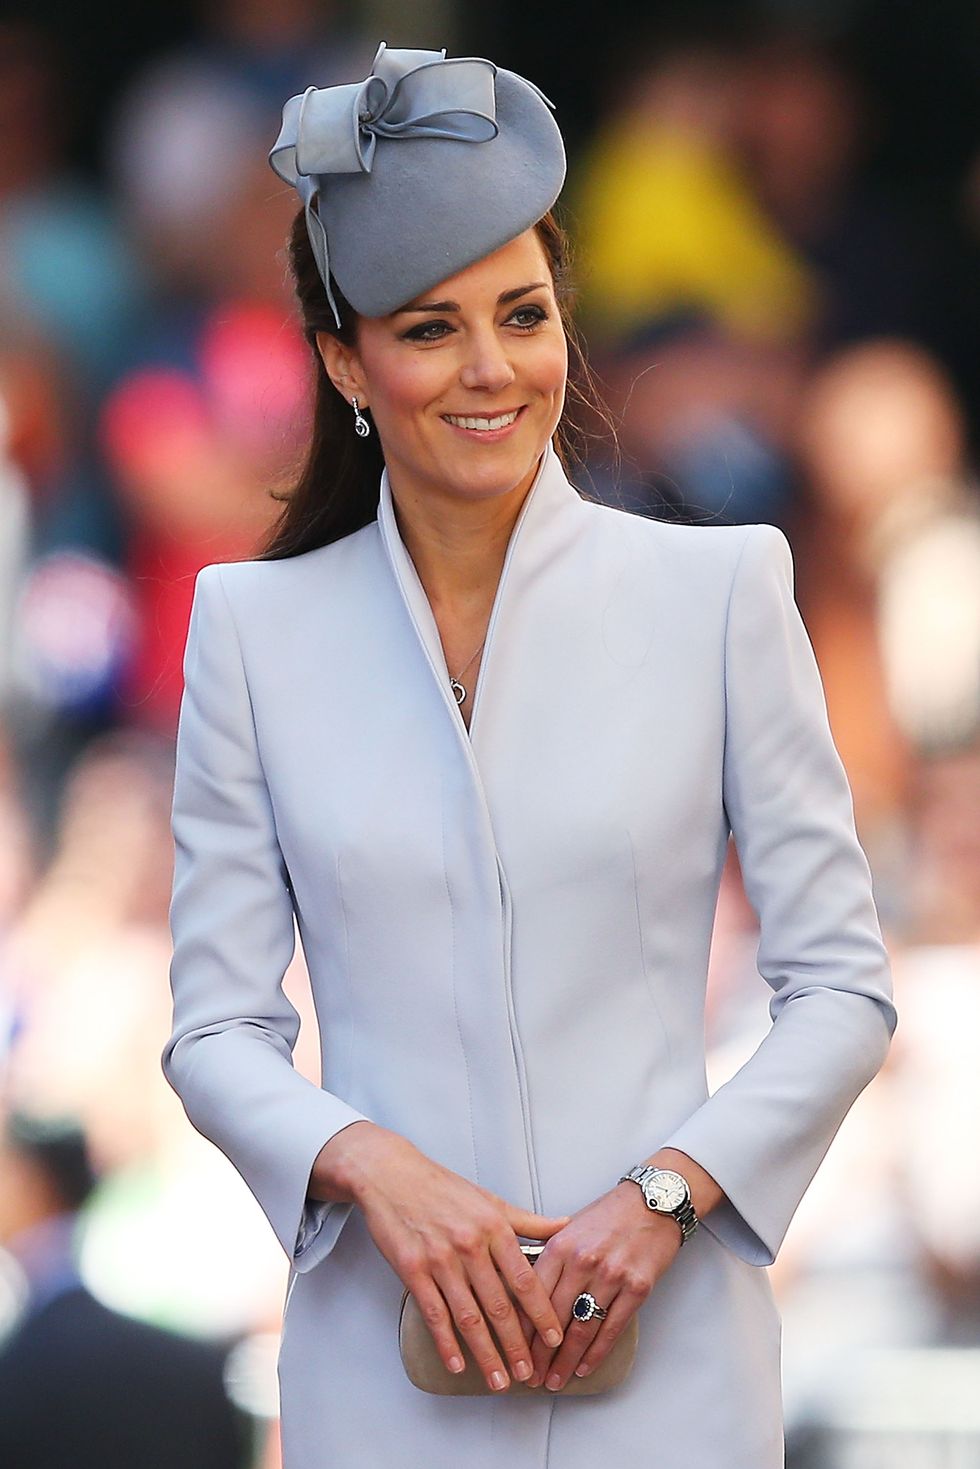 sydney, australia   april 20  catherine, duchess of cambridge arrives at st andrews cathedral for easter sunday service on april 20, 2014 in sydney, australia the duke and duchess of cambridge are on a three week tour of australia and new zealand, the first official trip overseas with their son, prince george of cambridge  photo by brendon thornegetty images